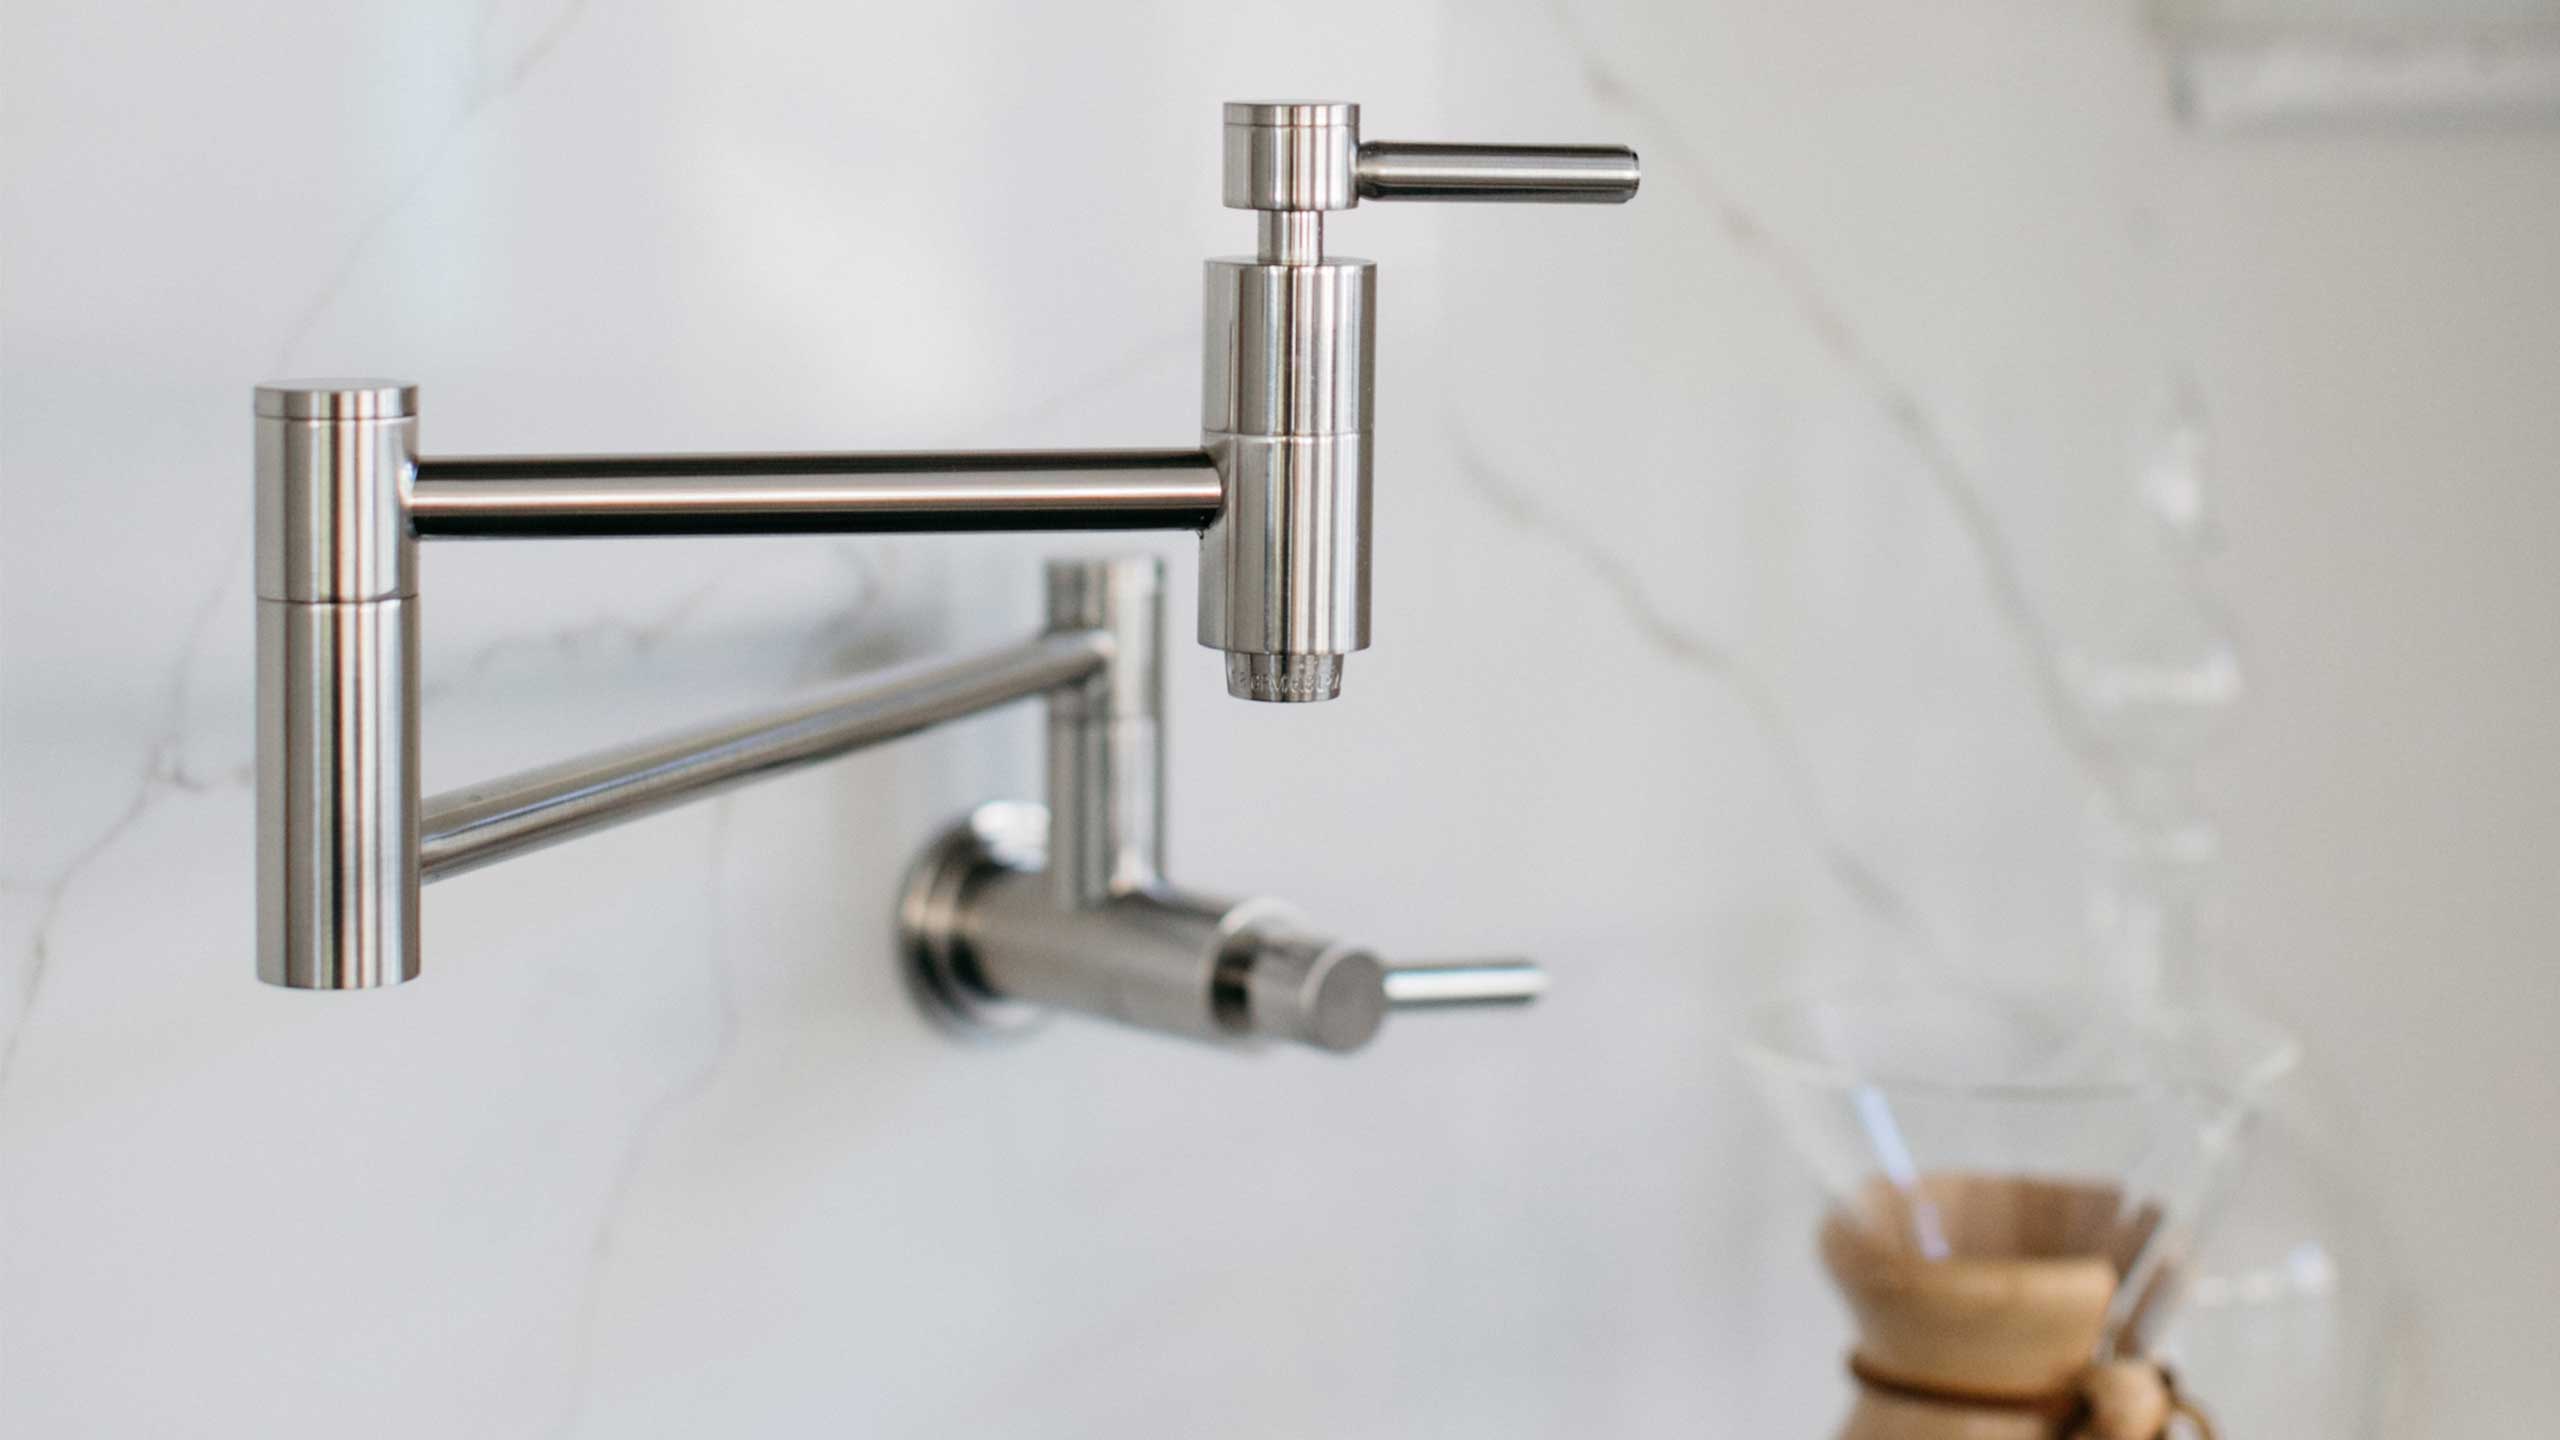 A white quartz backsplash with a mounted pot filler faucet is pictured